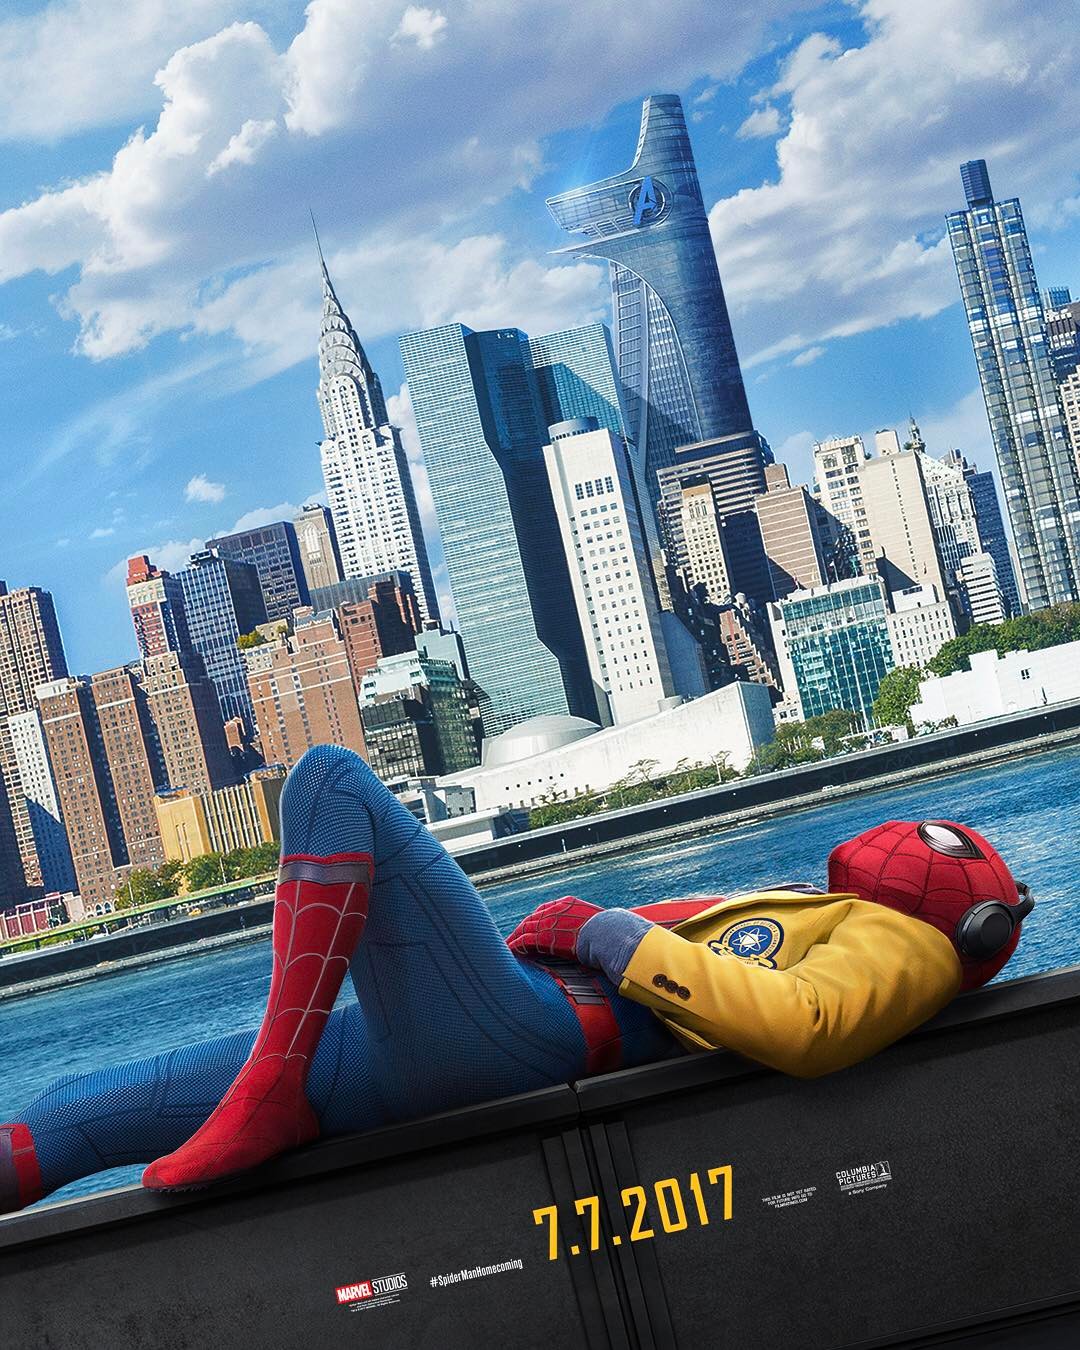 spider man homecoming download free